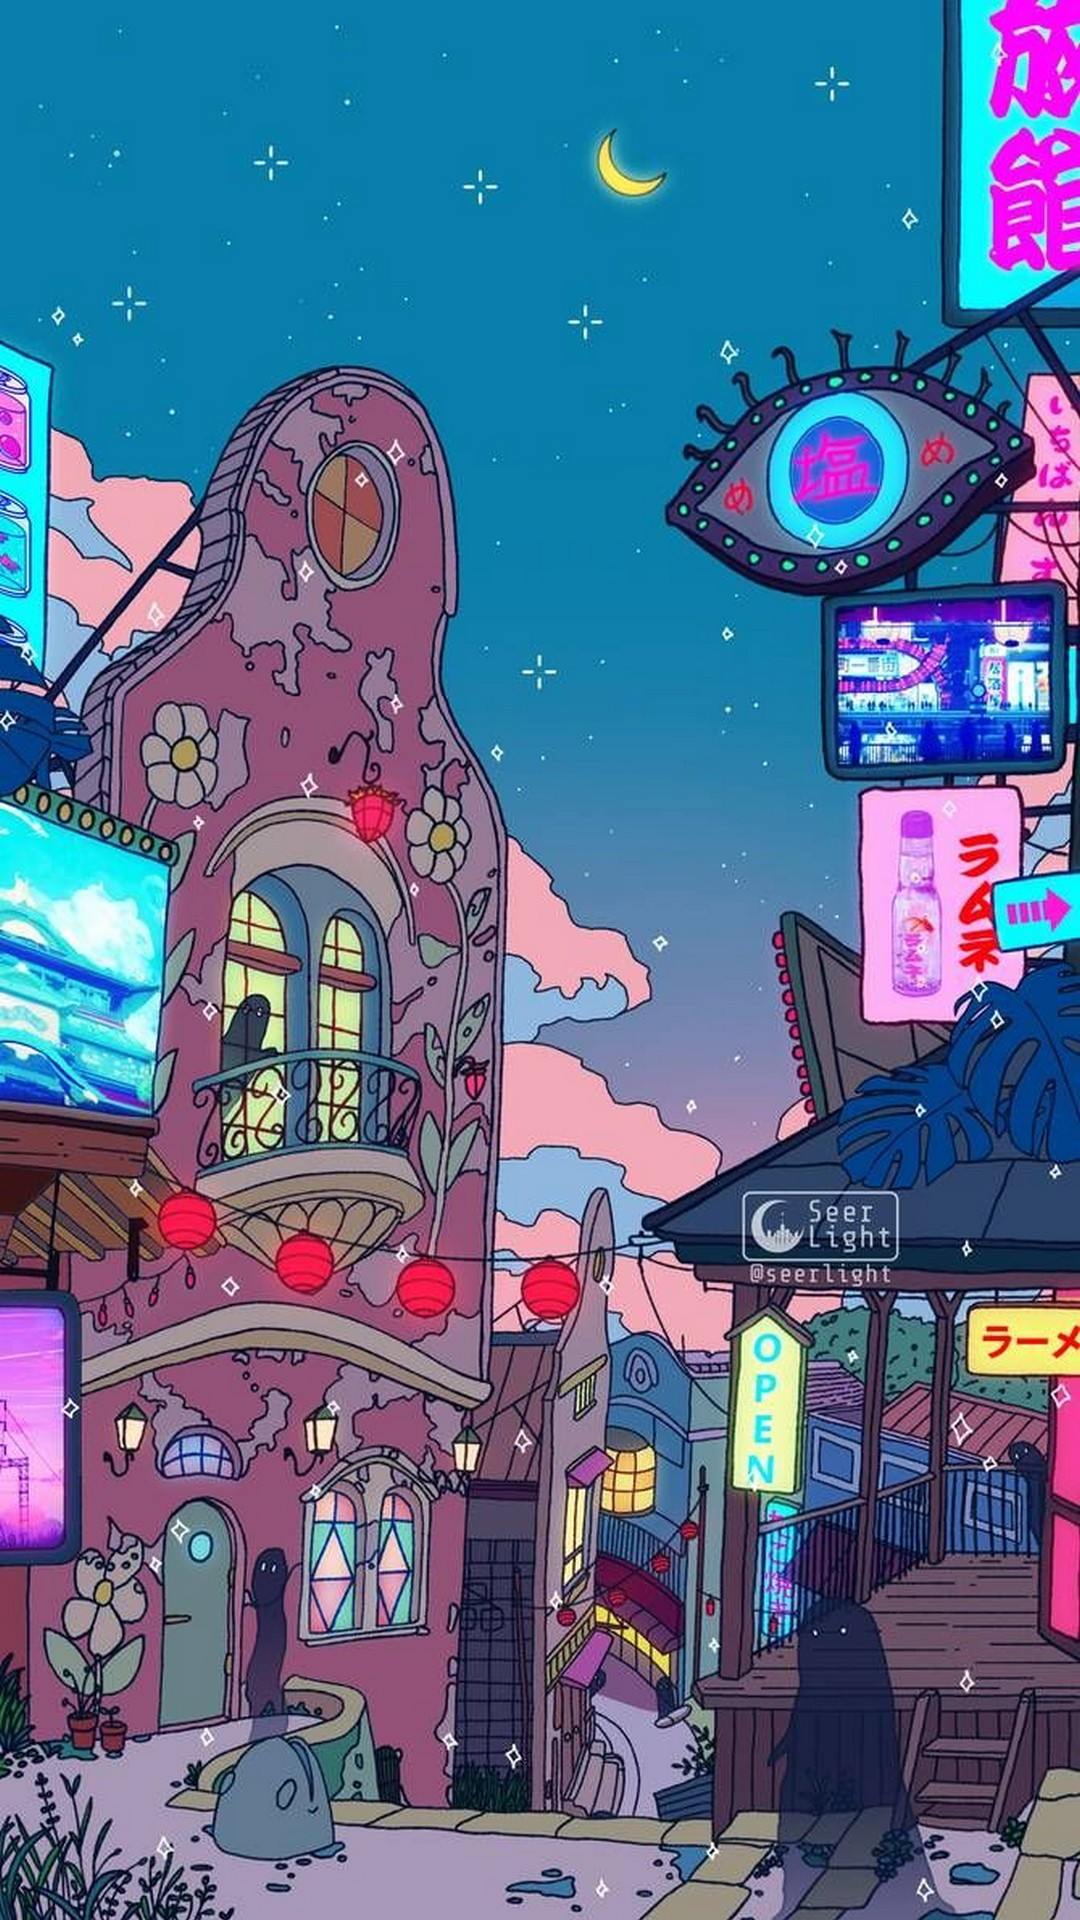 1200+] Anime Aesthetic Background s | Wallpapers.com